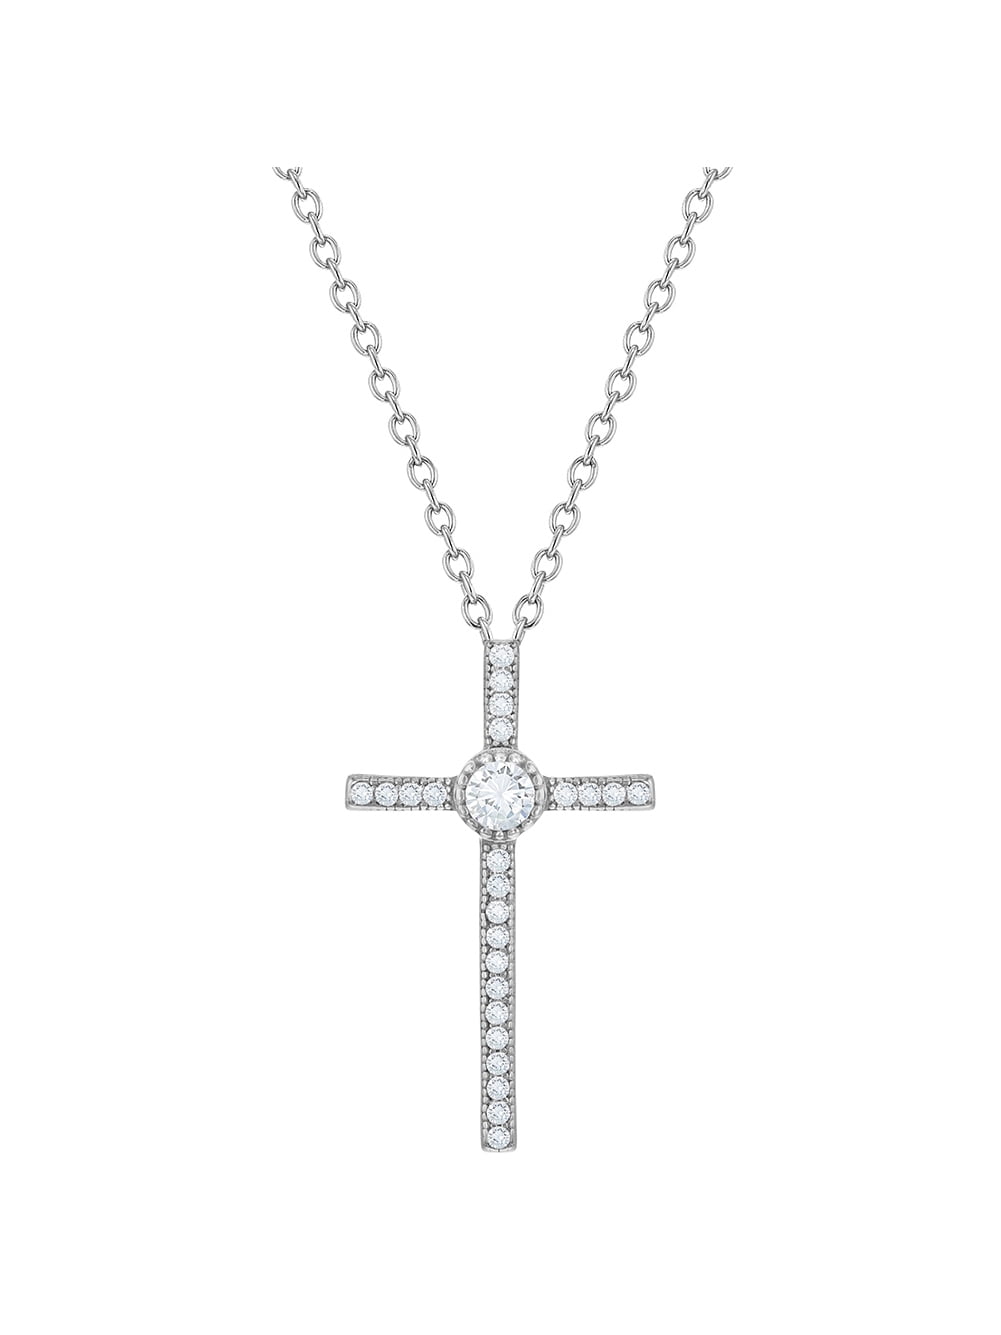 Details about   Love Key 925 Sterling Silver Cross Pendant Necklace Christmas Birthday Gift